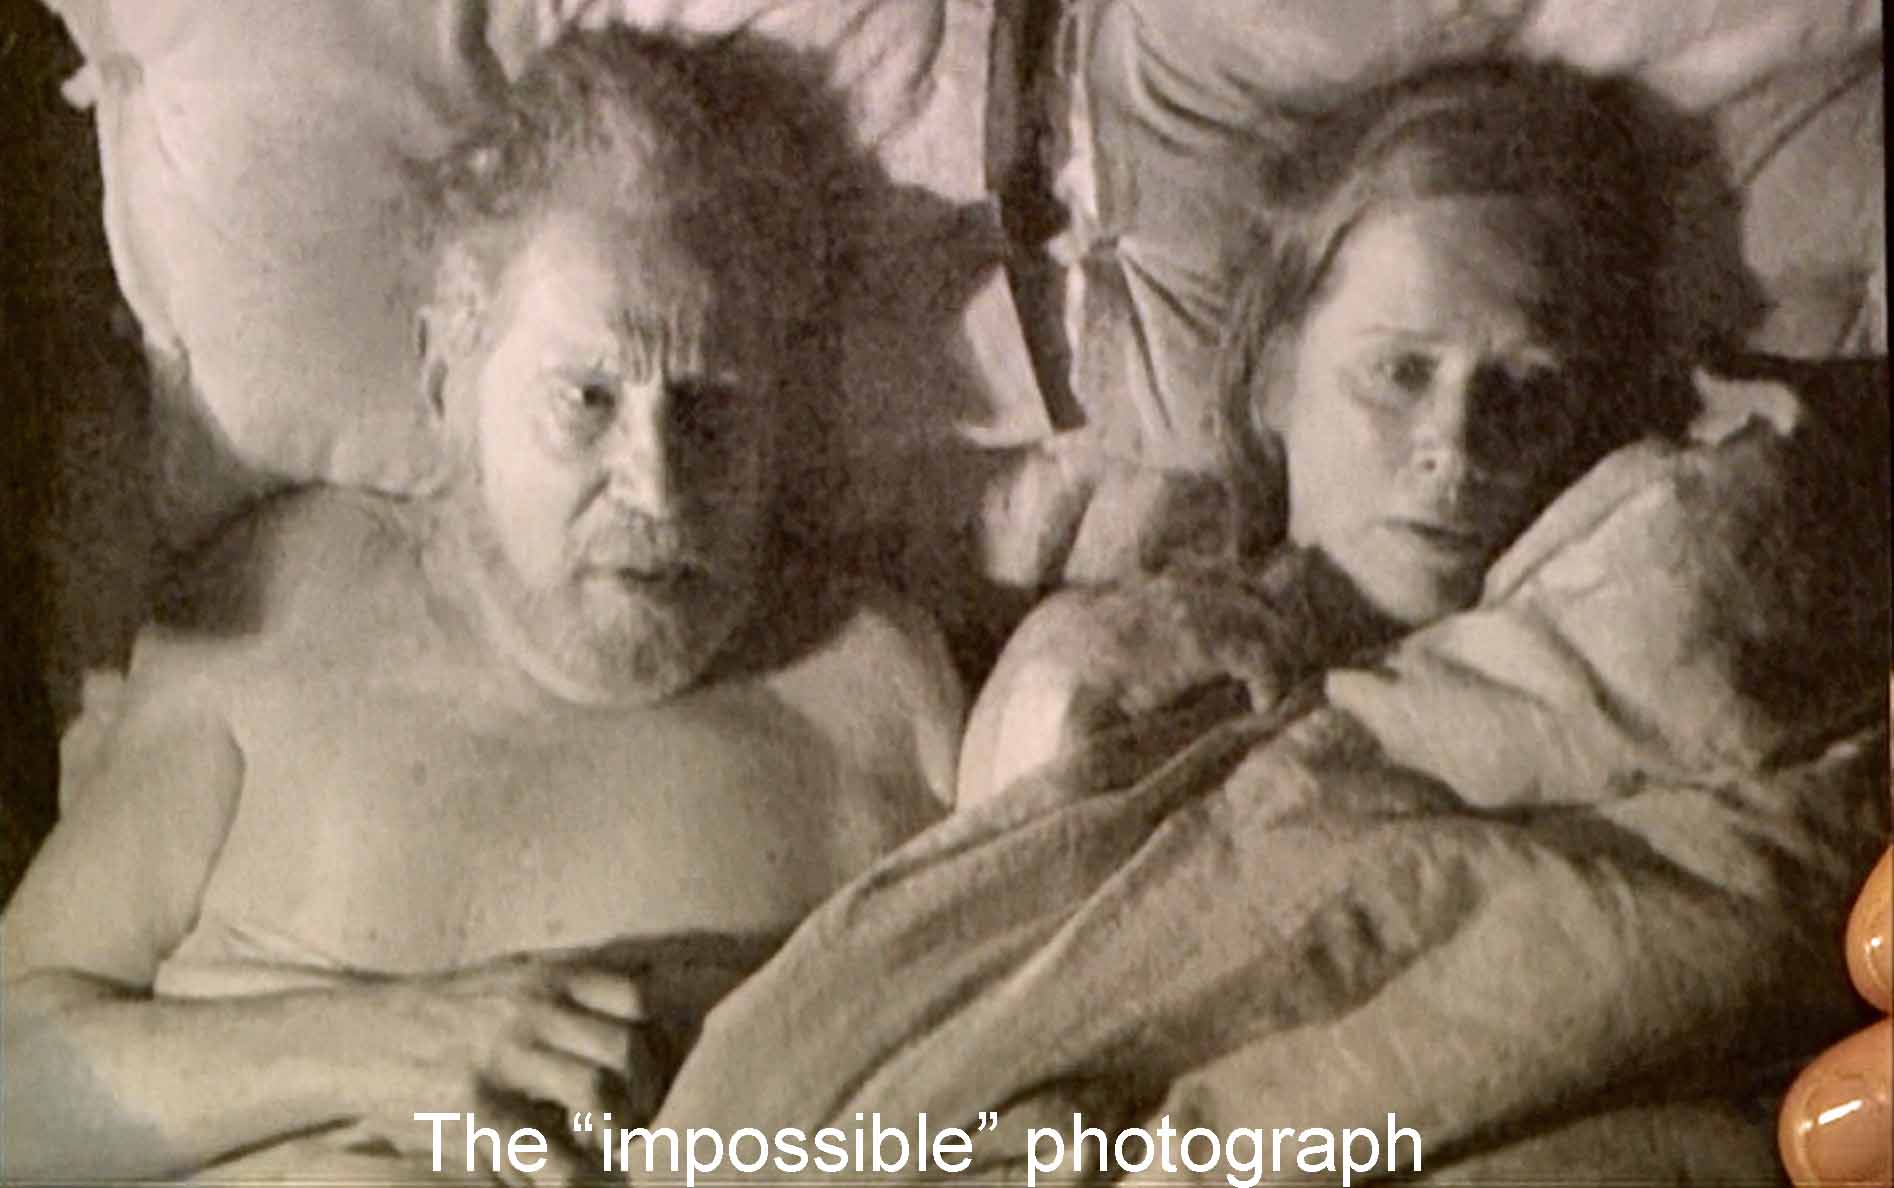 The 'impossible' photograph